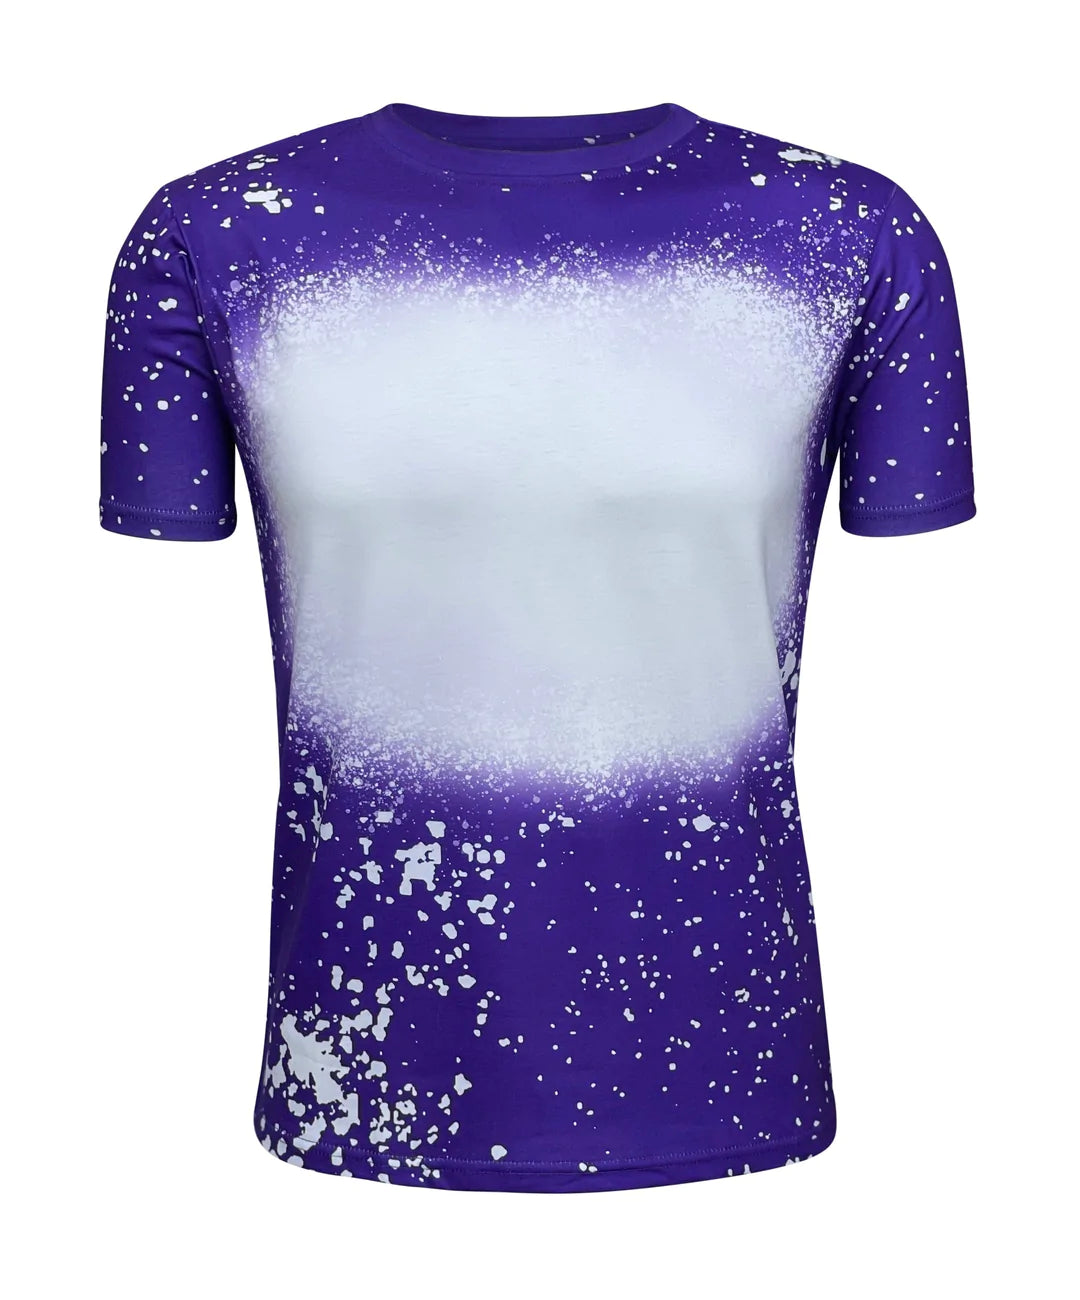 Unisex Faux Bleached Shirts Ready For Sublimation Or Screen Transfer 1221